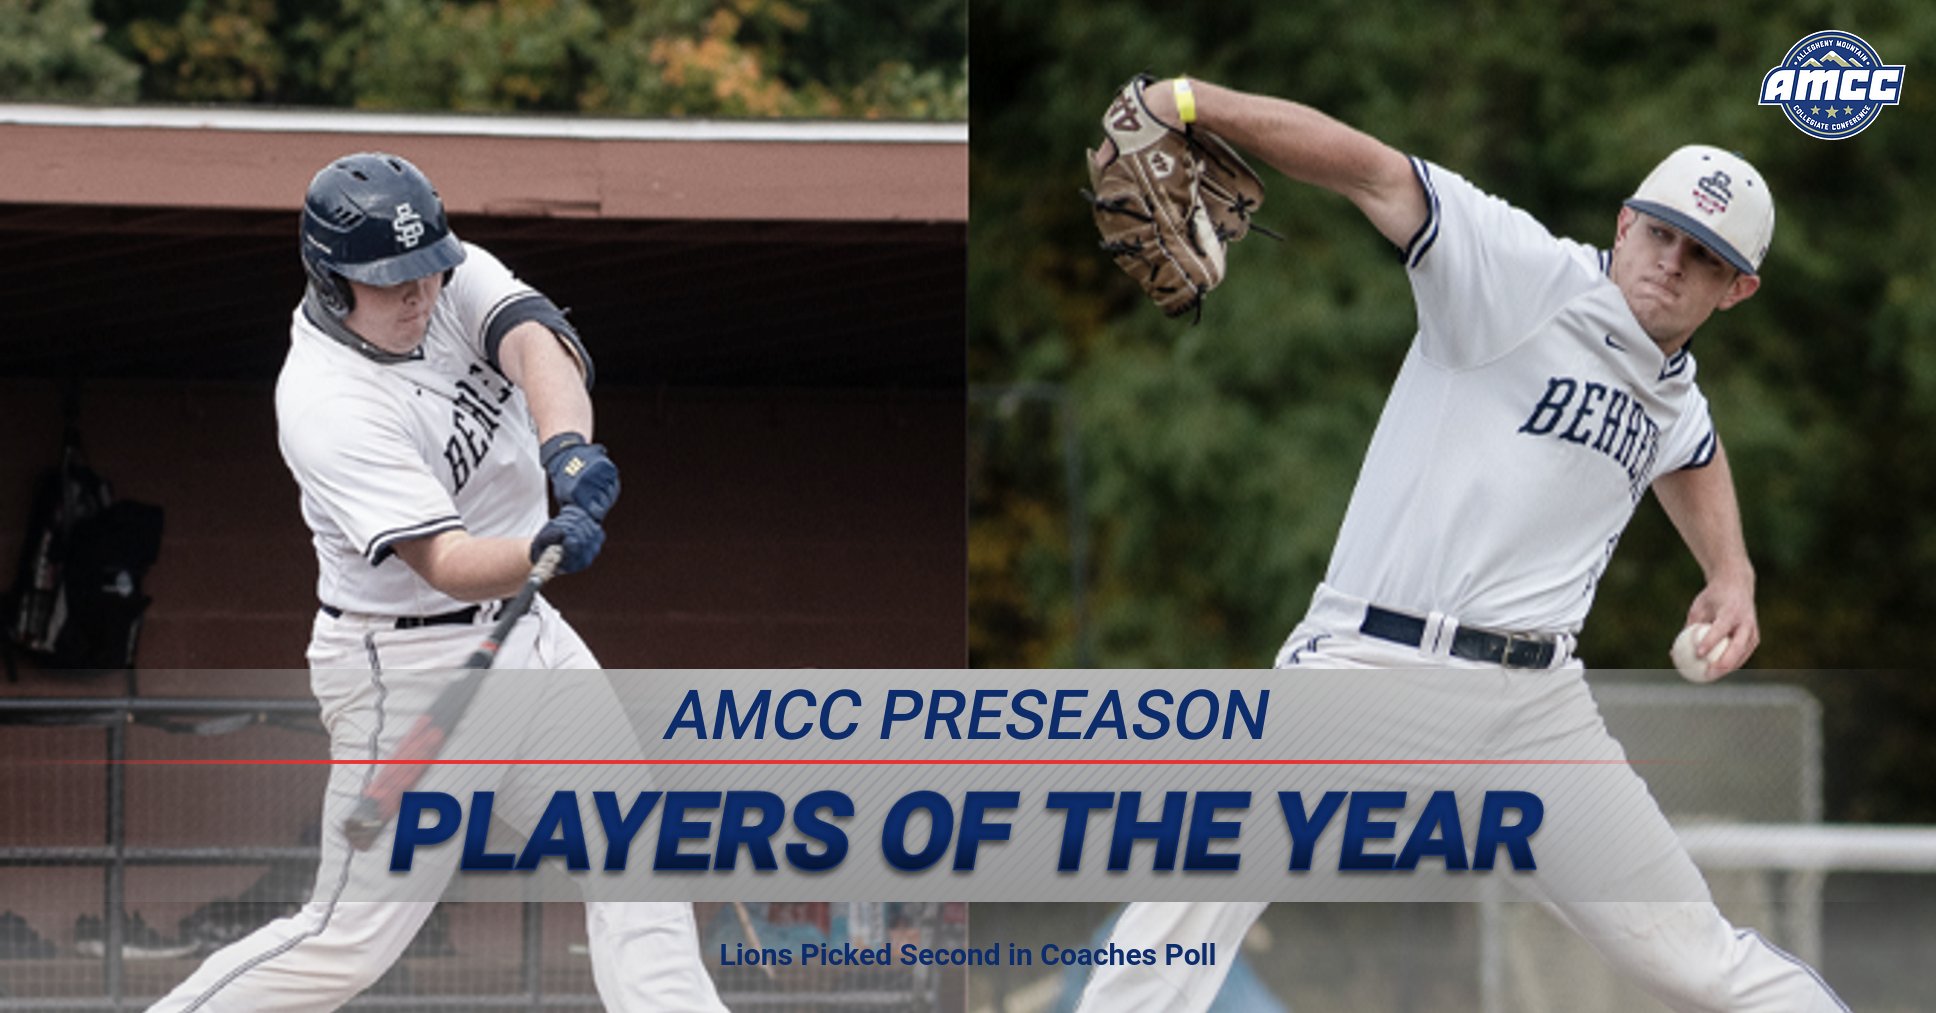 Wagner, Zbezinski Earn AMCC Preseason Honors; Lions Picked Second in Coaches Poll